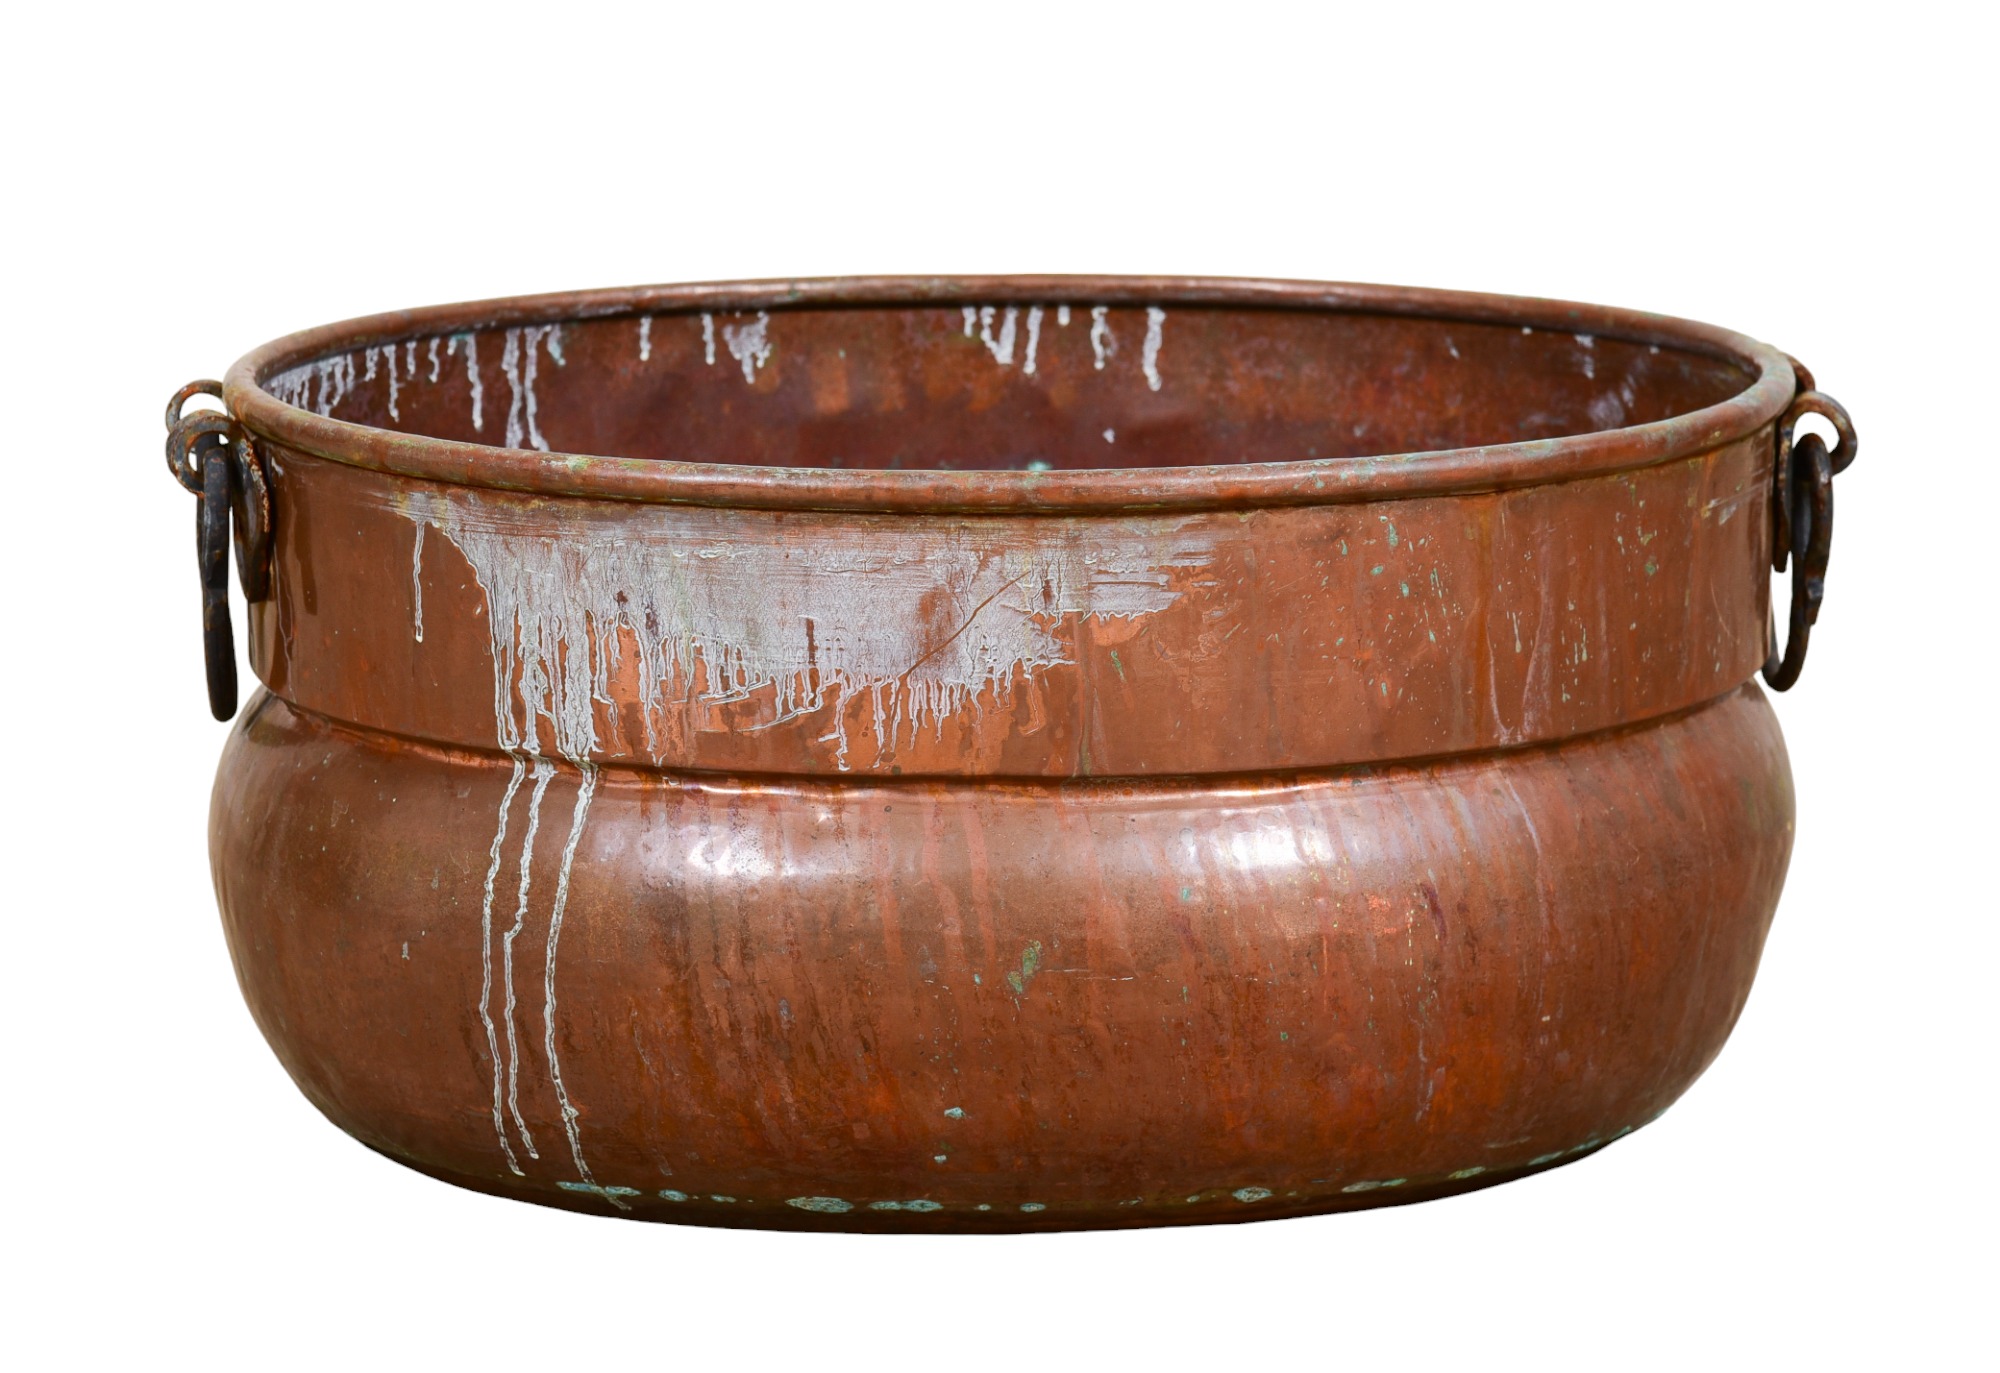 Oval copper wash basin with wrought 3ca4ec